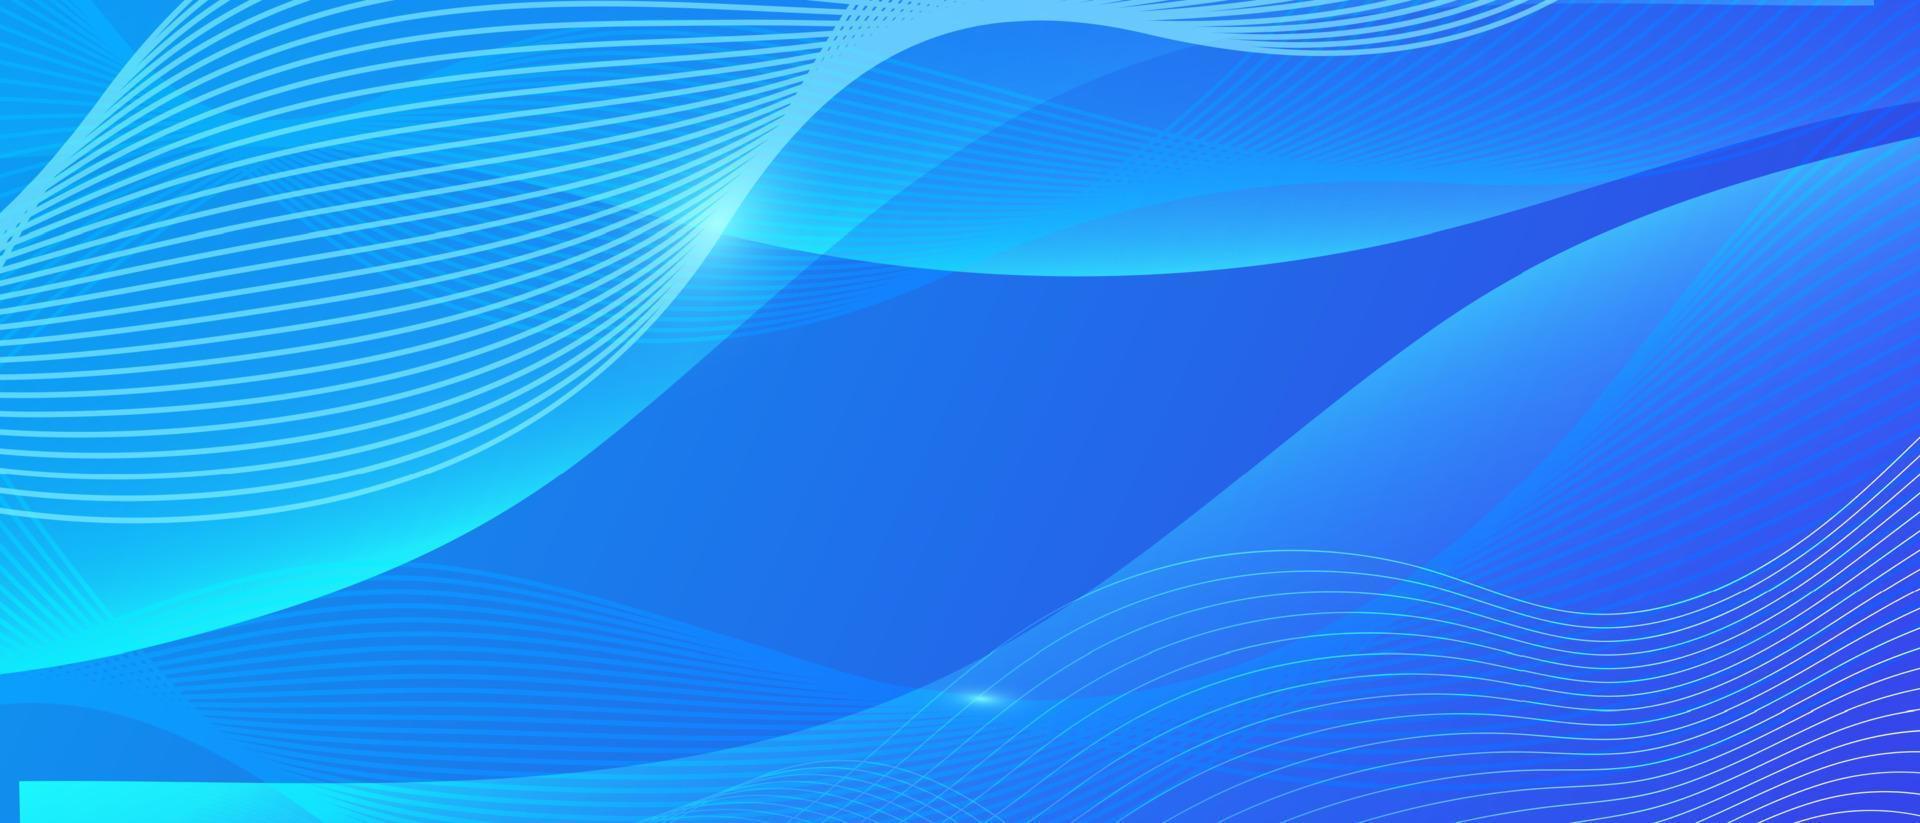 Abstract blue background with wavy lines. vector